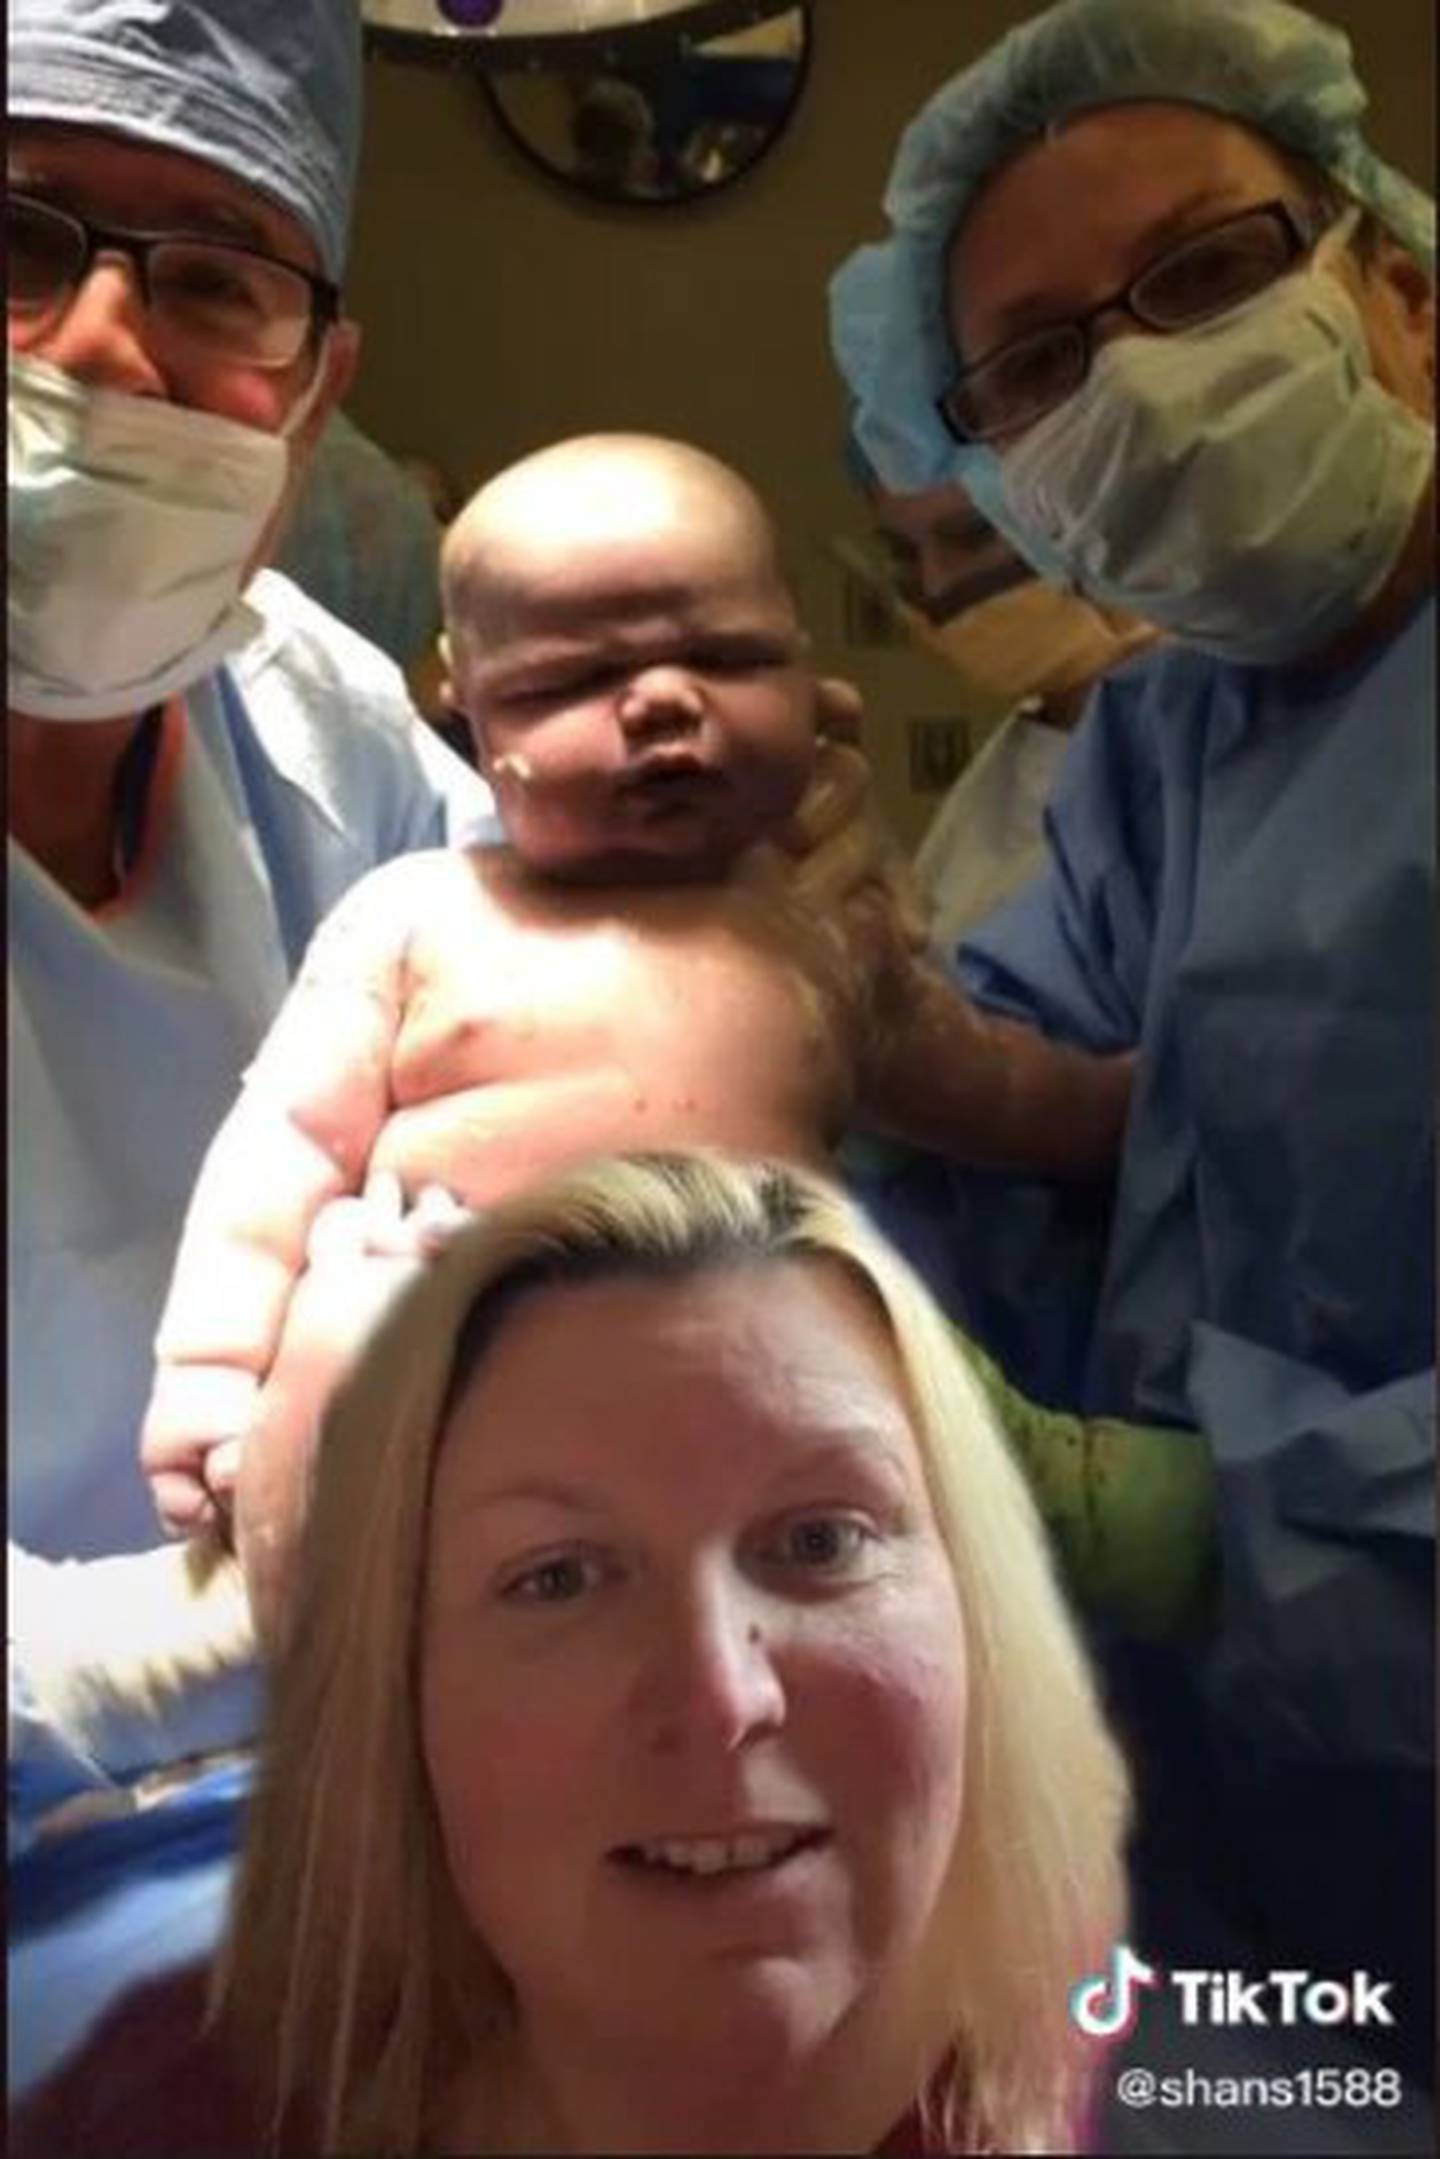 At 38 weeks and one day, Shan had her second son via C-section. Photo: TikTok